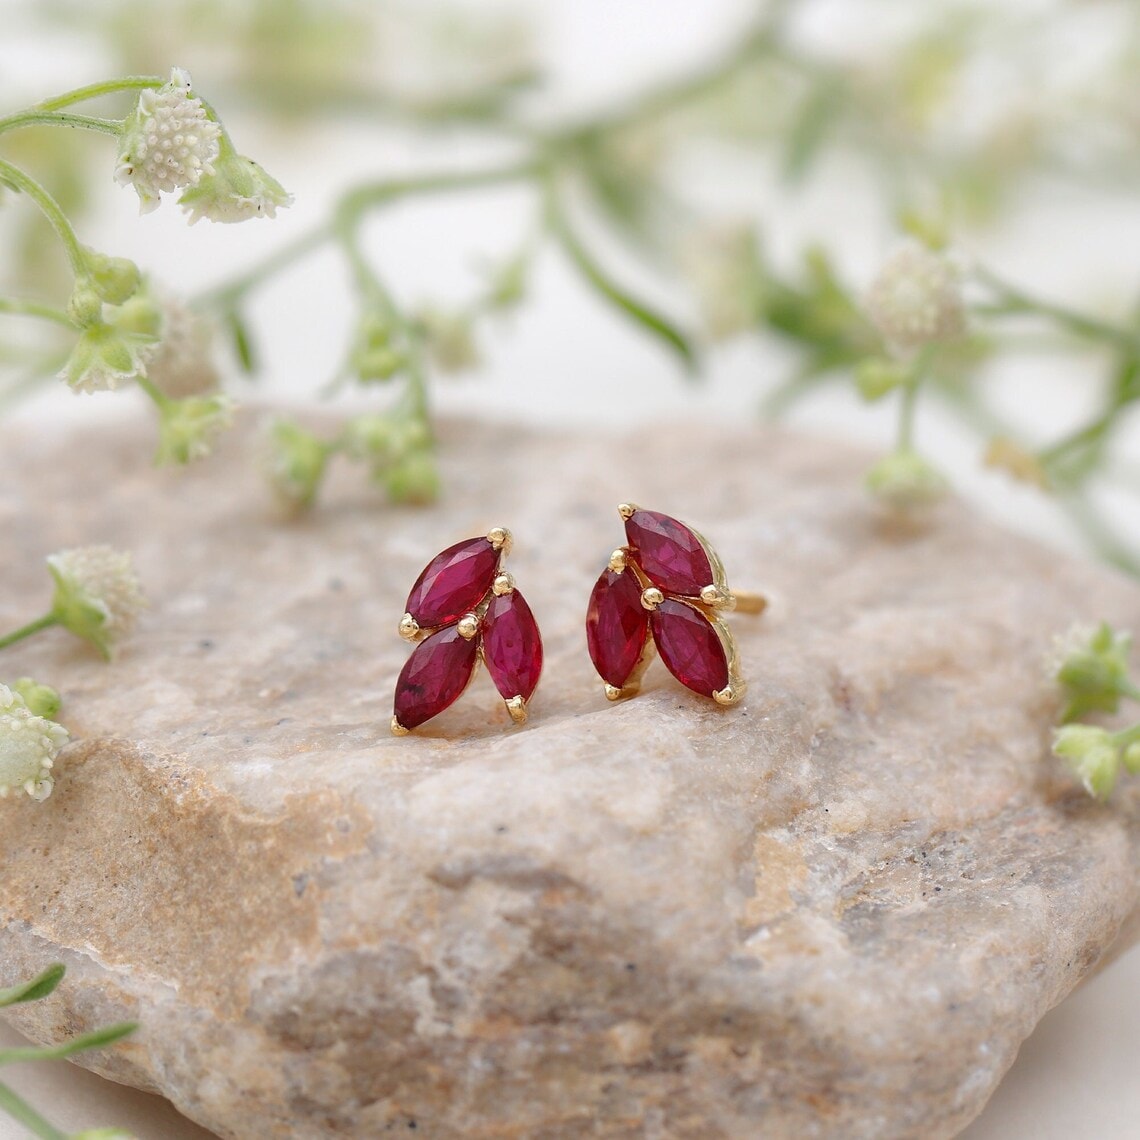 garnet earrings with floral style